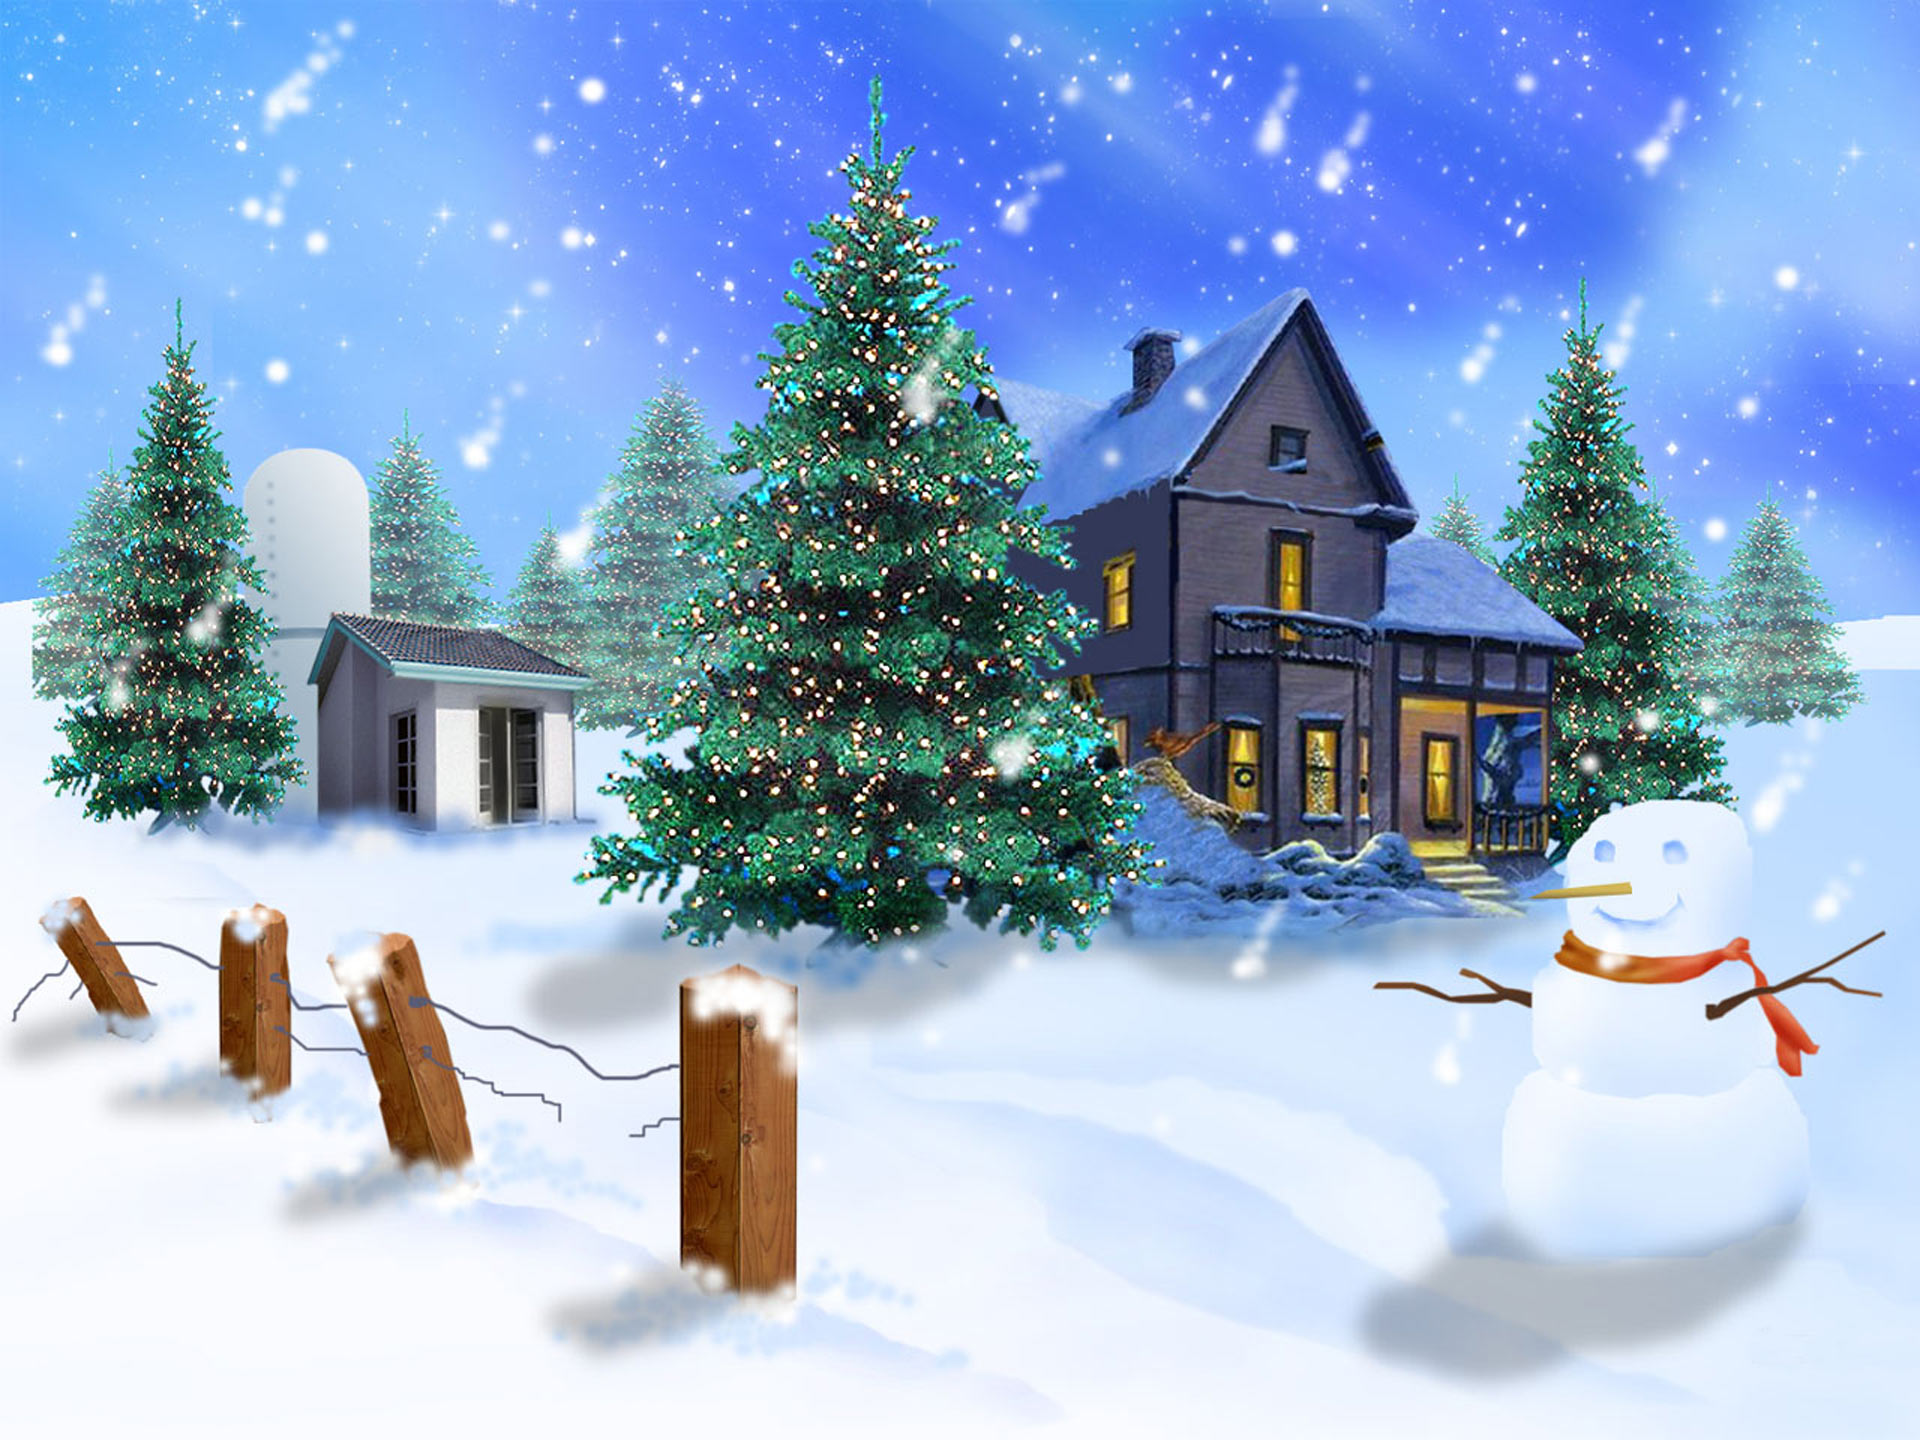 Christmas Pictures - Merry Christmas Winter Scenes - HD Wallpaper 